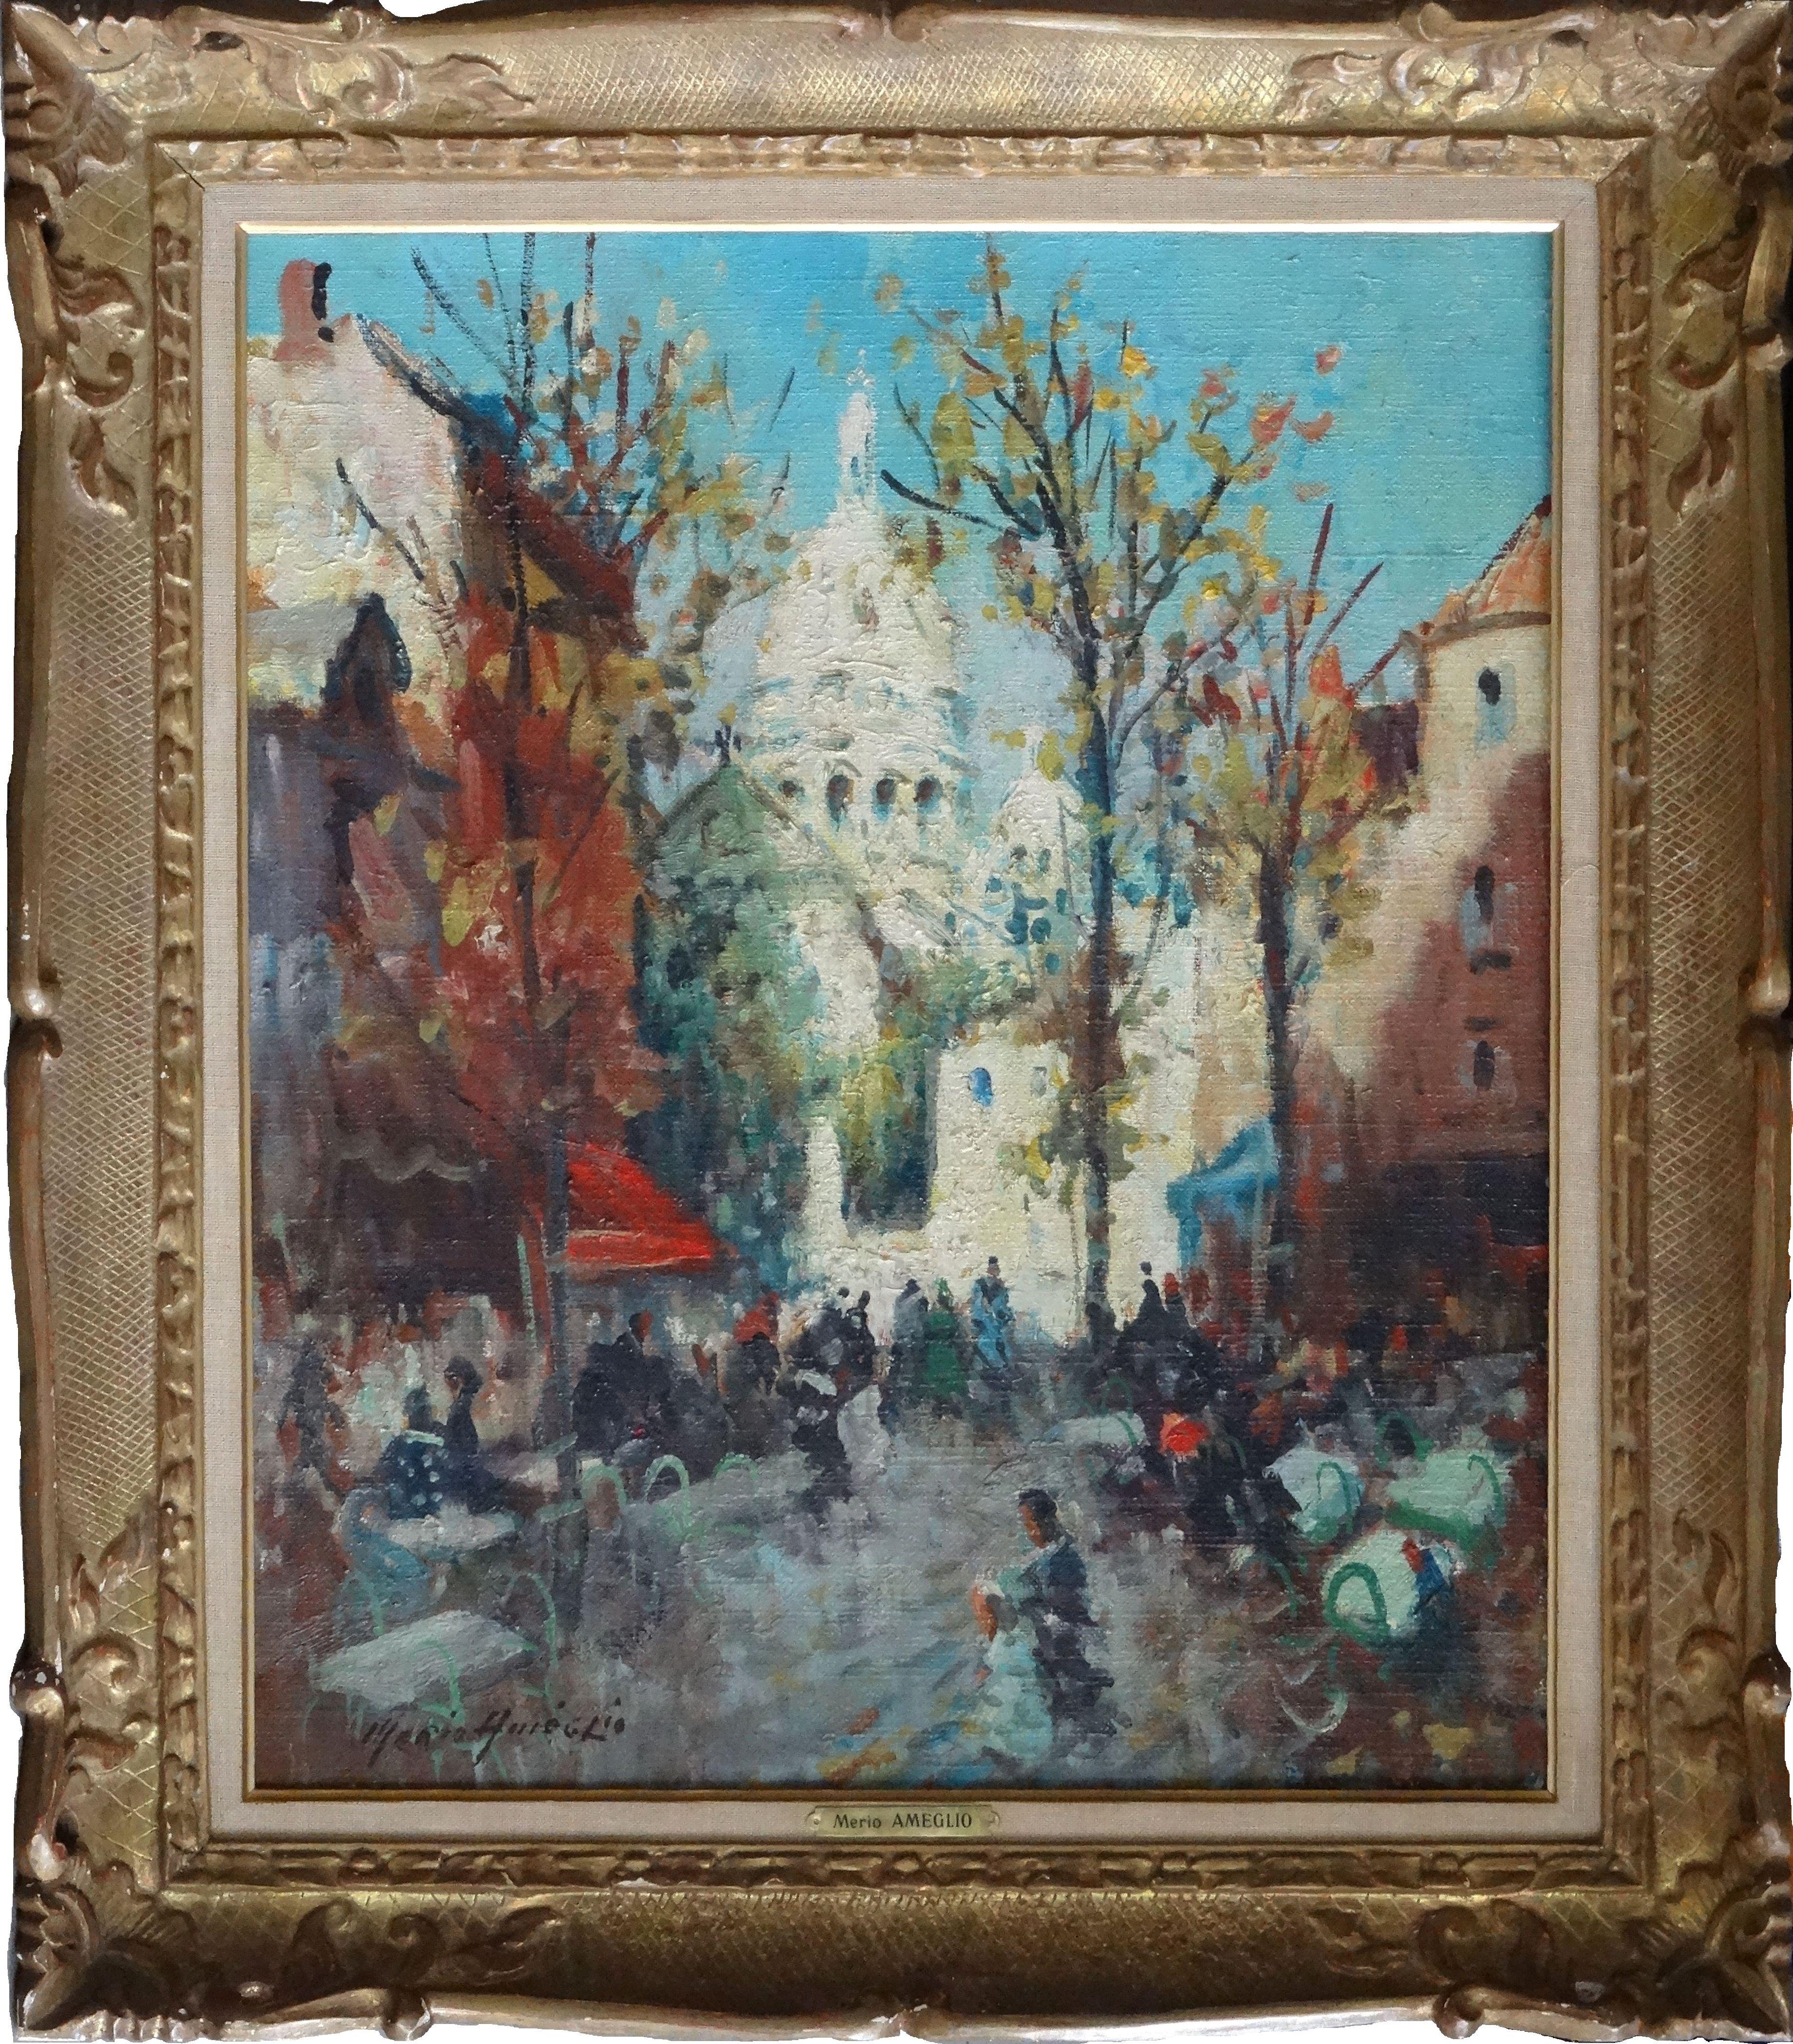 Montmartre. Oil on canvas, 55x46 cm - Painting by Merio Ameglio